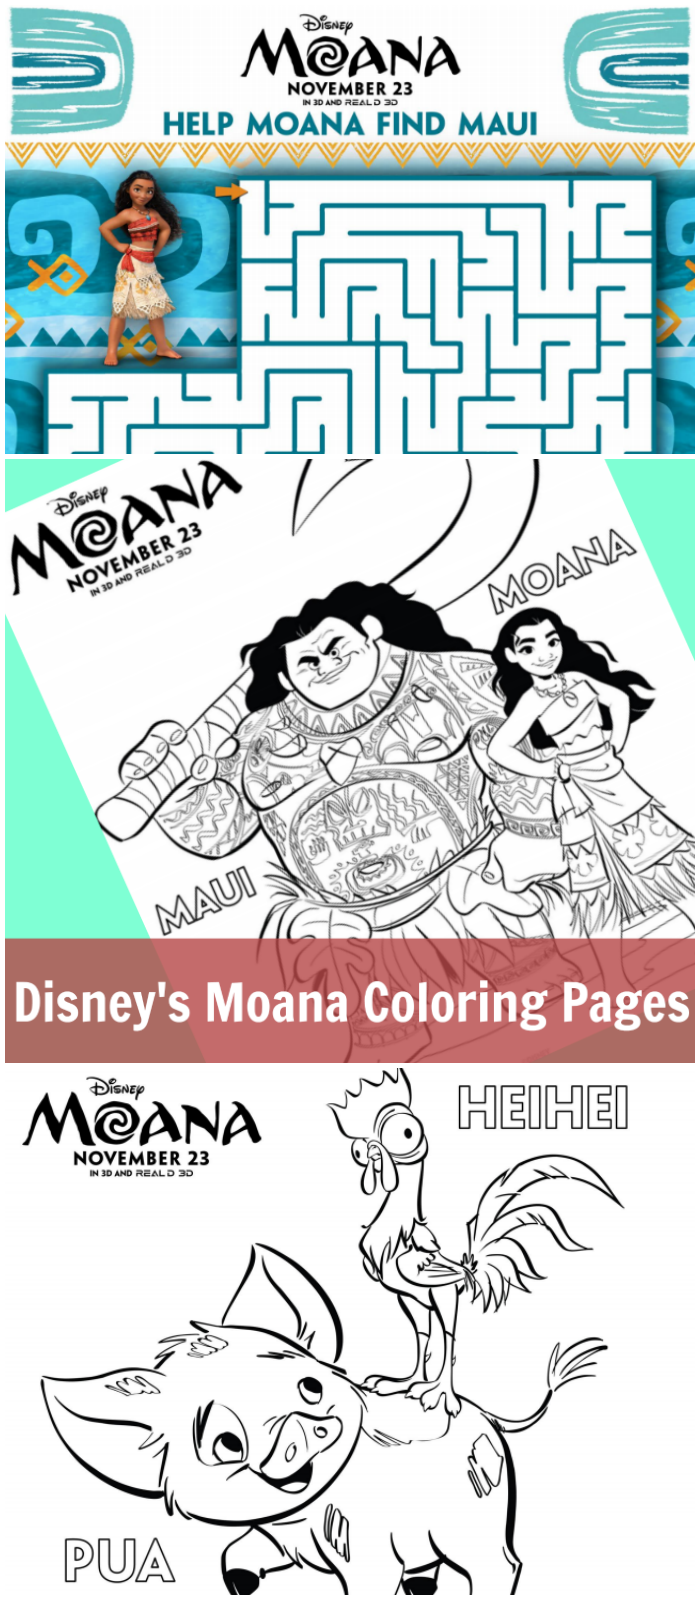 Have fun with your kids with these Disney's Moana Coloring Pages. Download them all at CleverlyMe.com